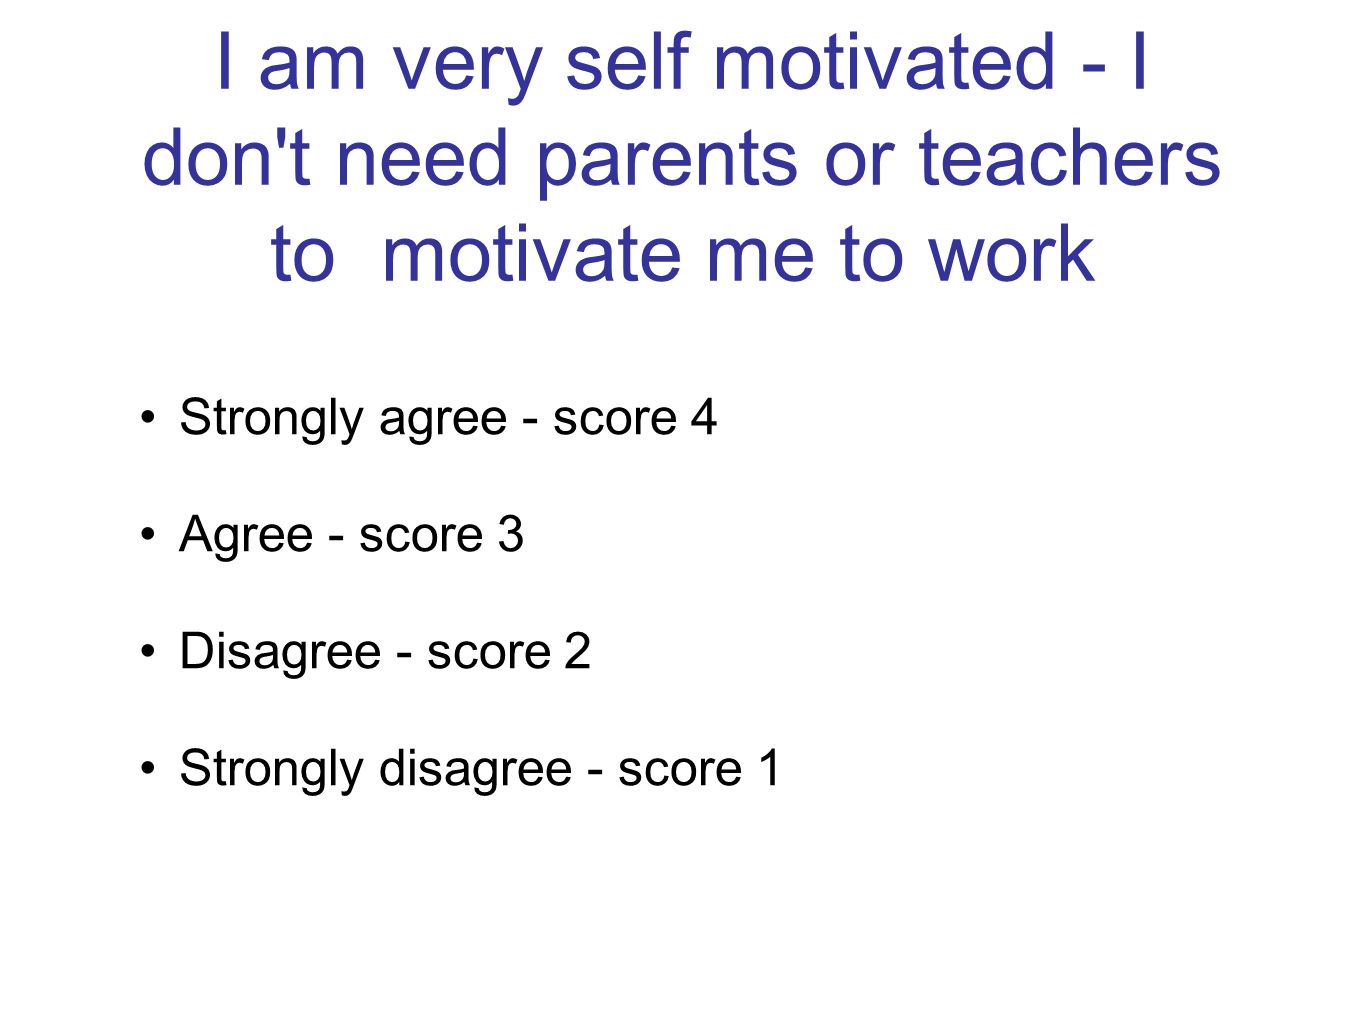 I am very self motivated - I don t need parents or teachers to motivate me to work Strongly agree - score 4 Agree - score 3 Disagree - score 2 Strongly disagree - score 1